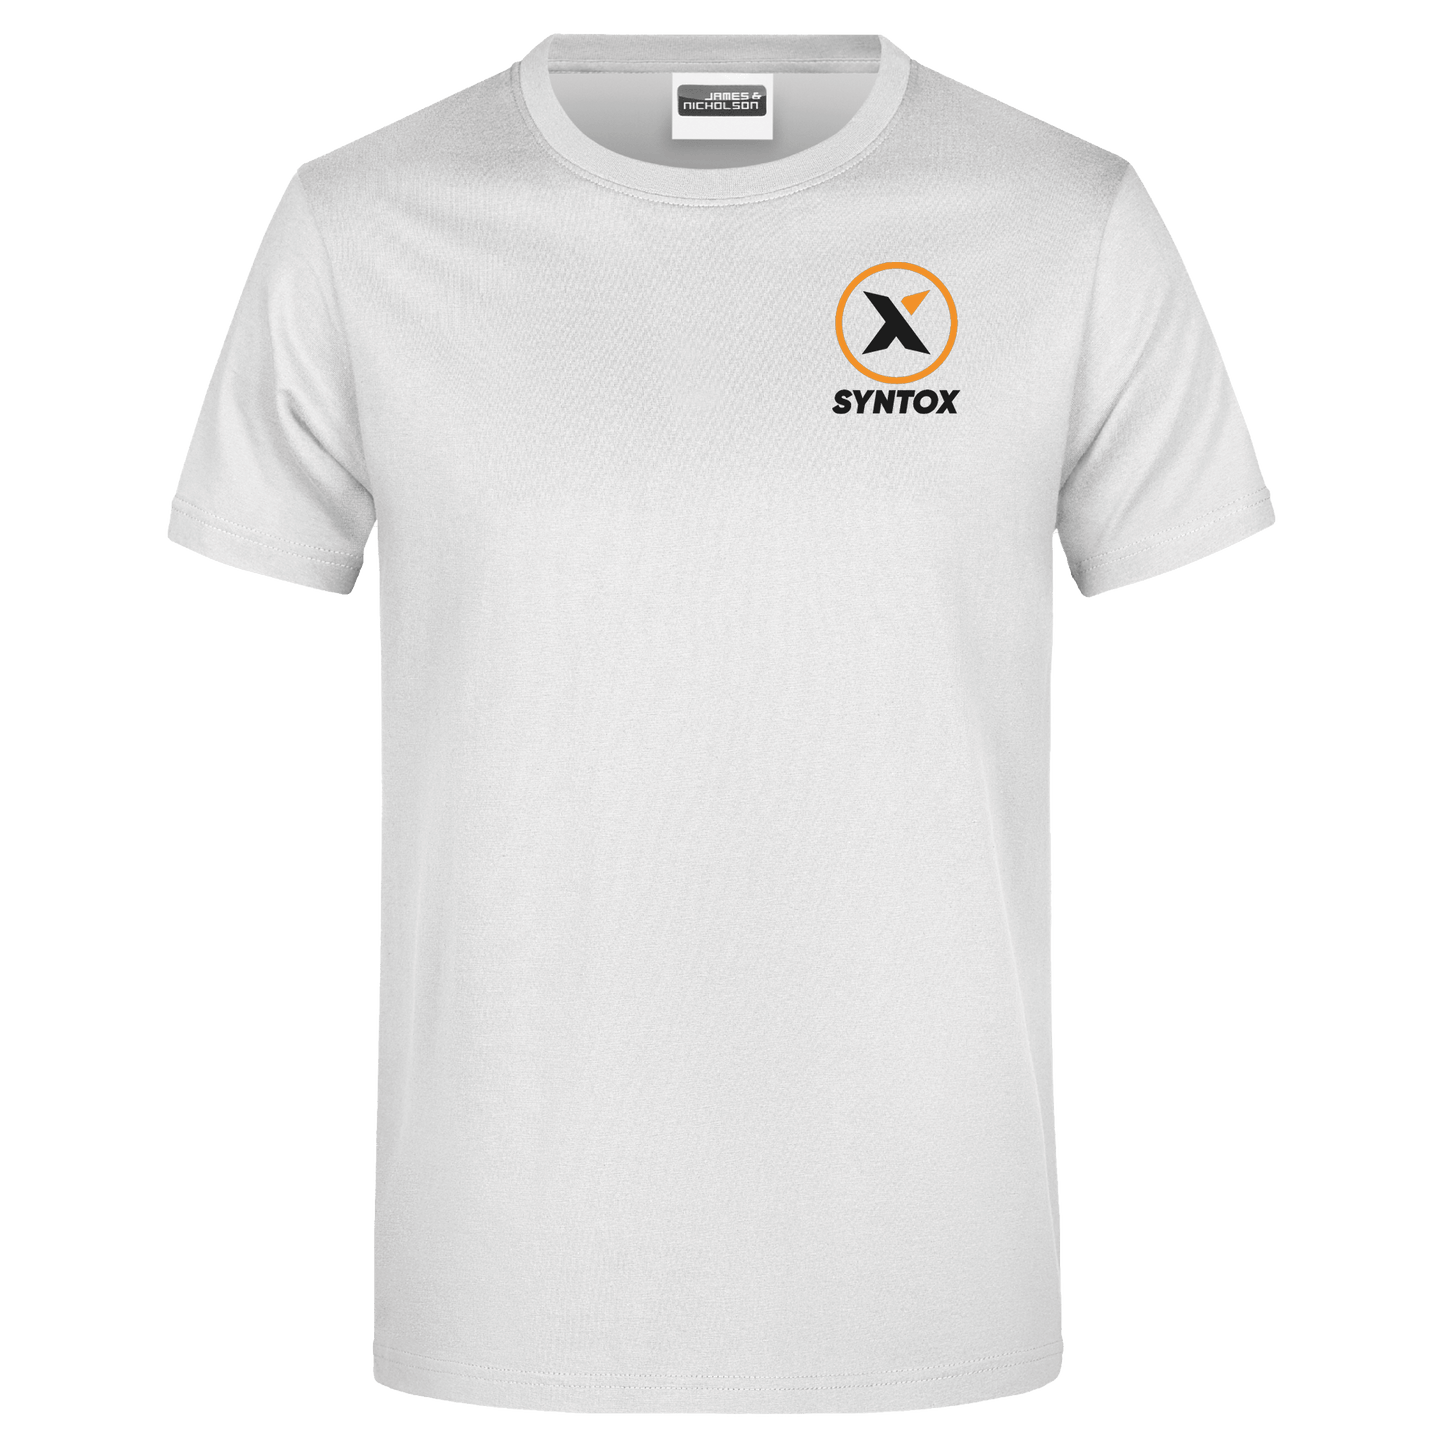 Bomulds T-shirt - Voksen - Syntox